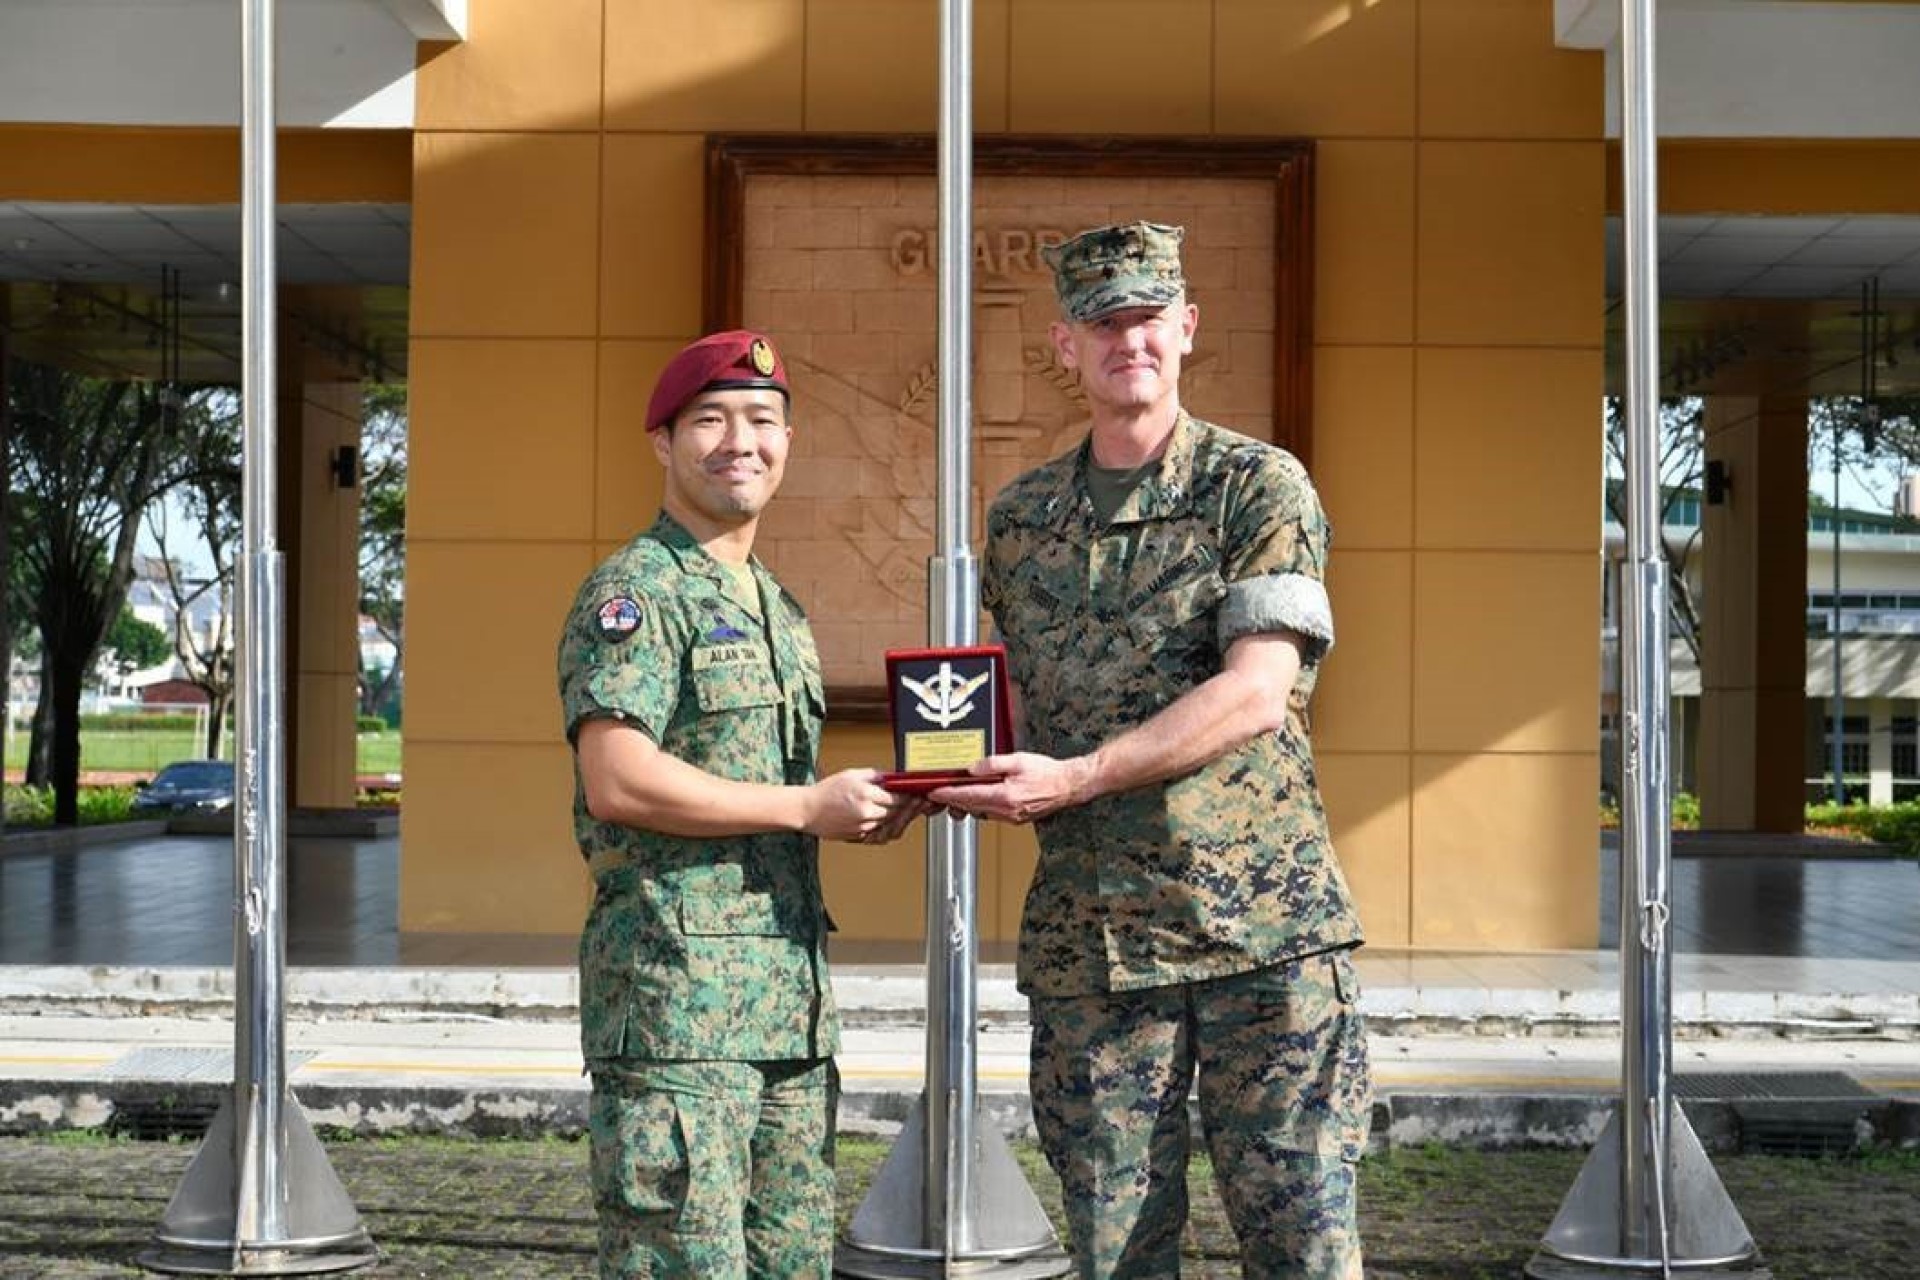 Commander 7th Singapore Infantry Brigade (7 SIB), Colonel (COL) Alan Tan (left) and Commanding Officer of the Marine Rotational Force Southeast Asia, I Marine Expeditionary Force (MEF), COL Thomas Siverts co-officated the closing ceremony at Bedok Camp this morning.